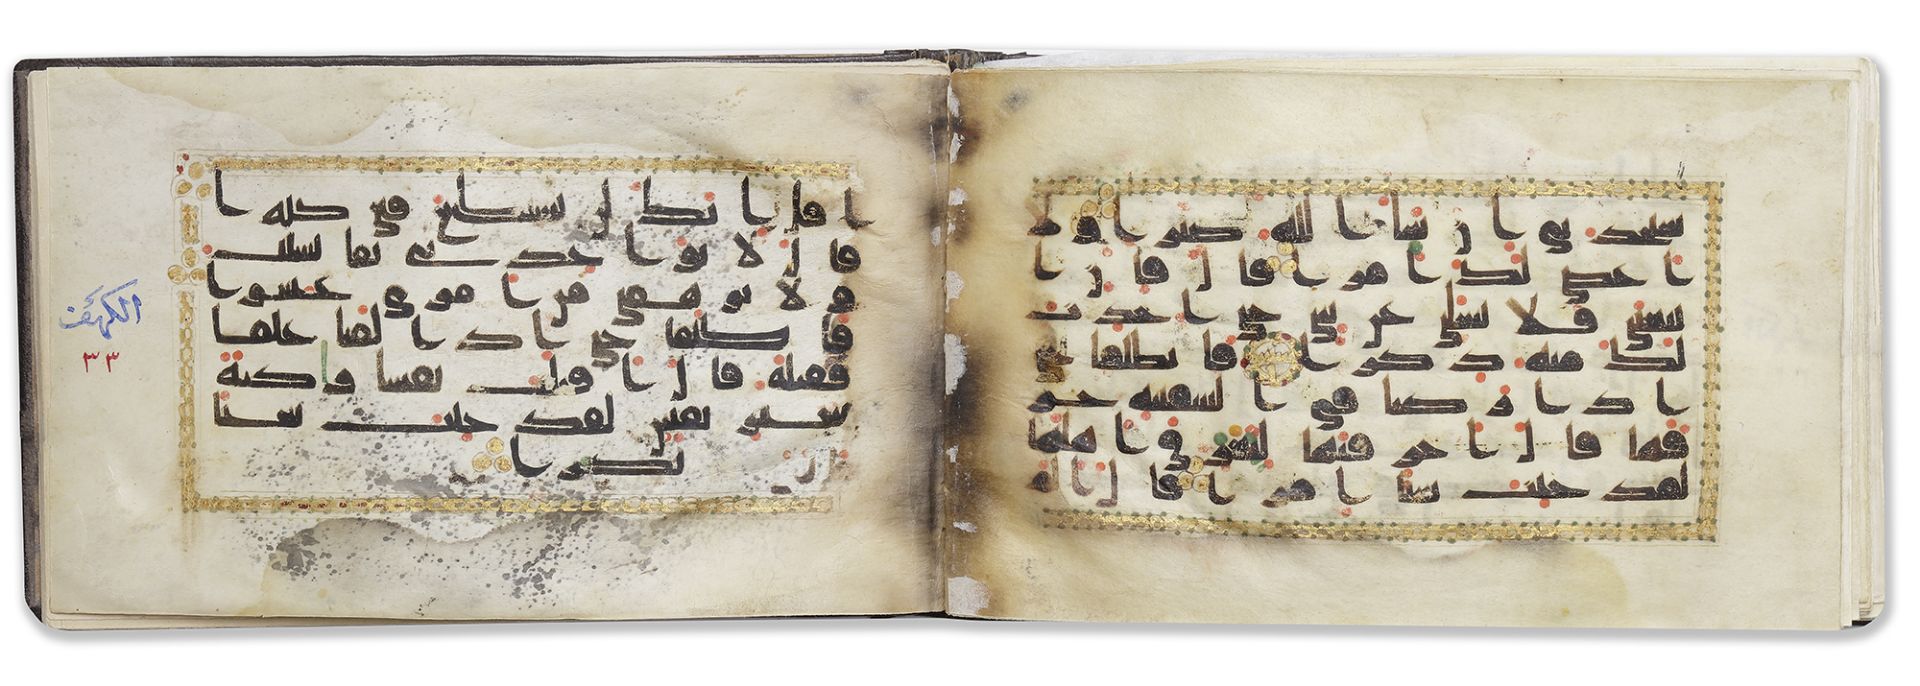 A KUFIC QURAN SECTION NEAR EAST OR NORTH AFRICA, 9TH CENTURY - Image 2 of 9